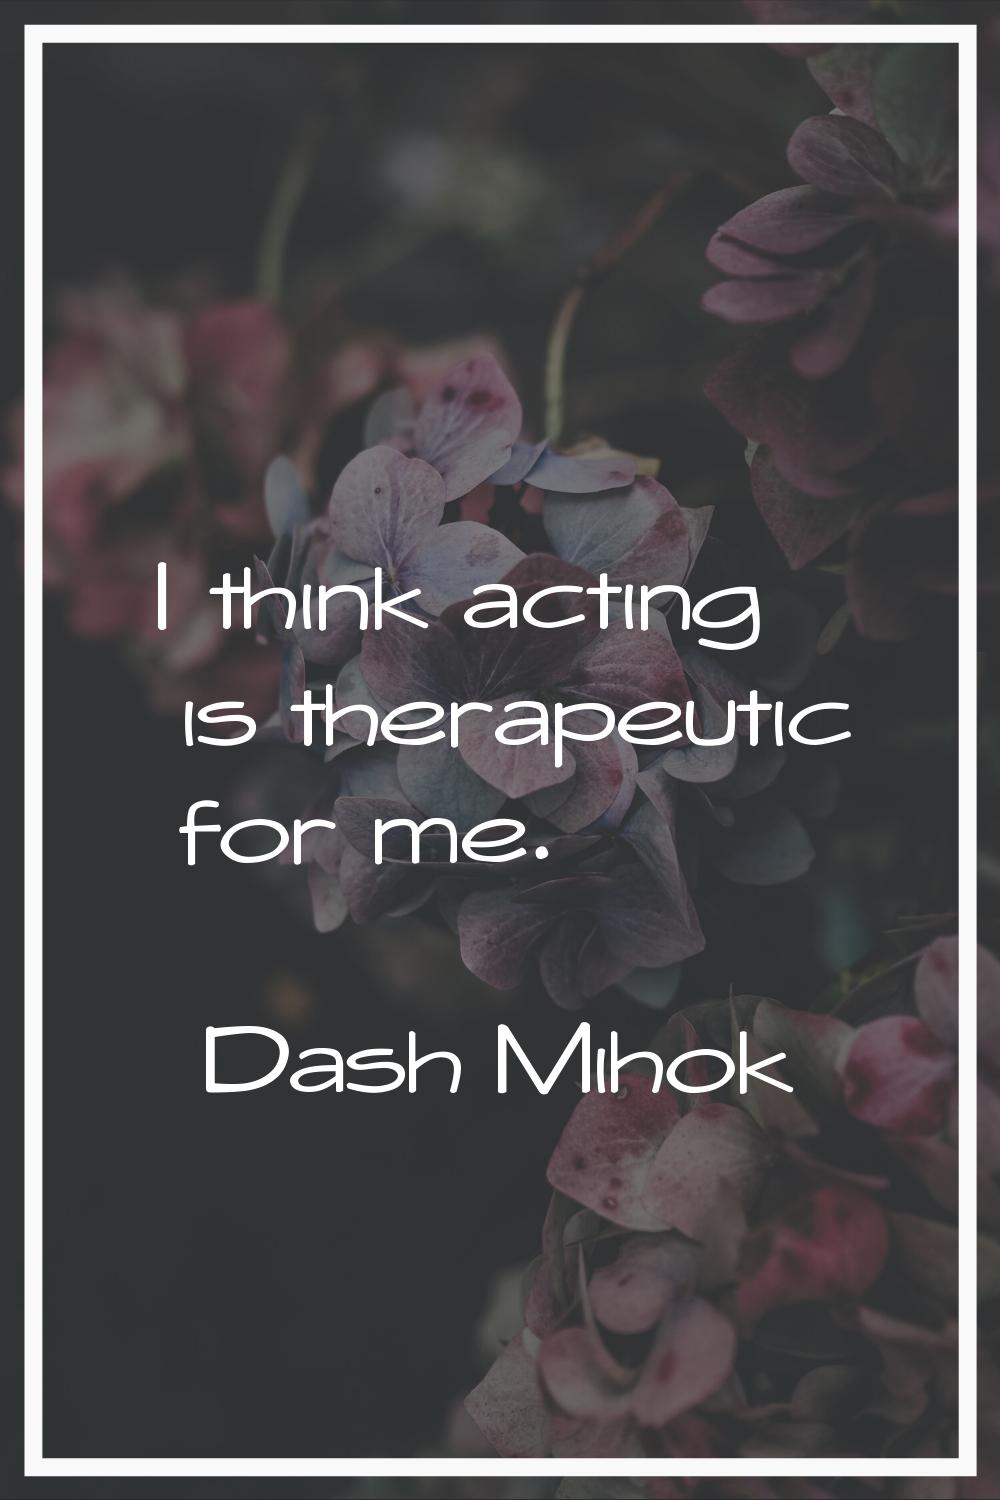 I think acting is therapeutic for me.